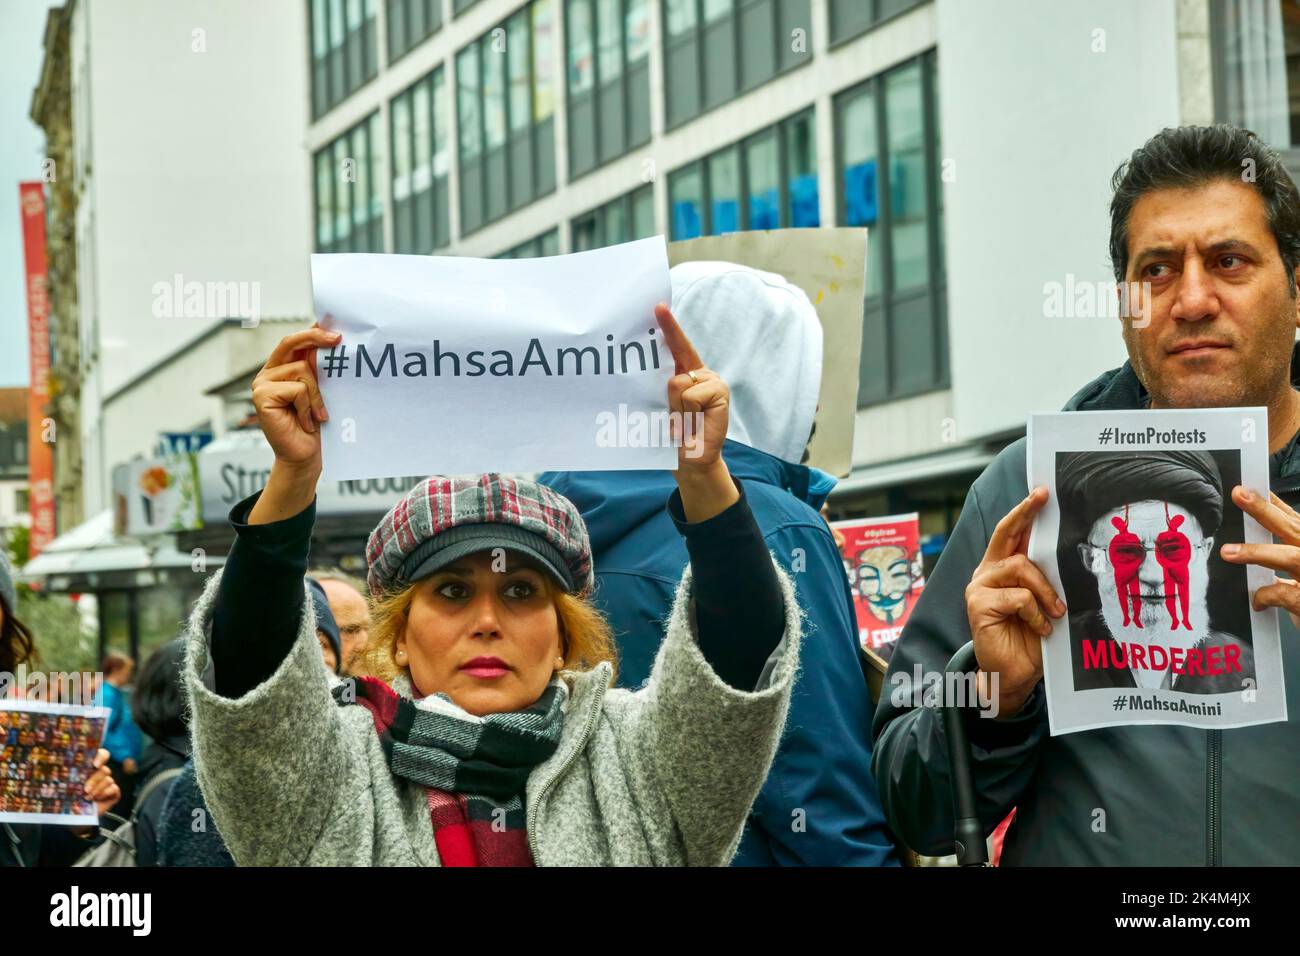 Braunschweig, Germany, October 1, 2022: Blonde woman holds up sign with hashtag to Mahsa Amini, next to man who dubs ayatholla a murderer Stock Photo